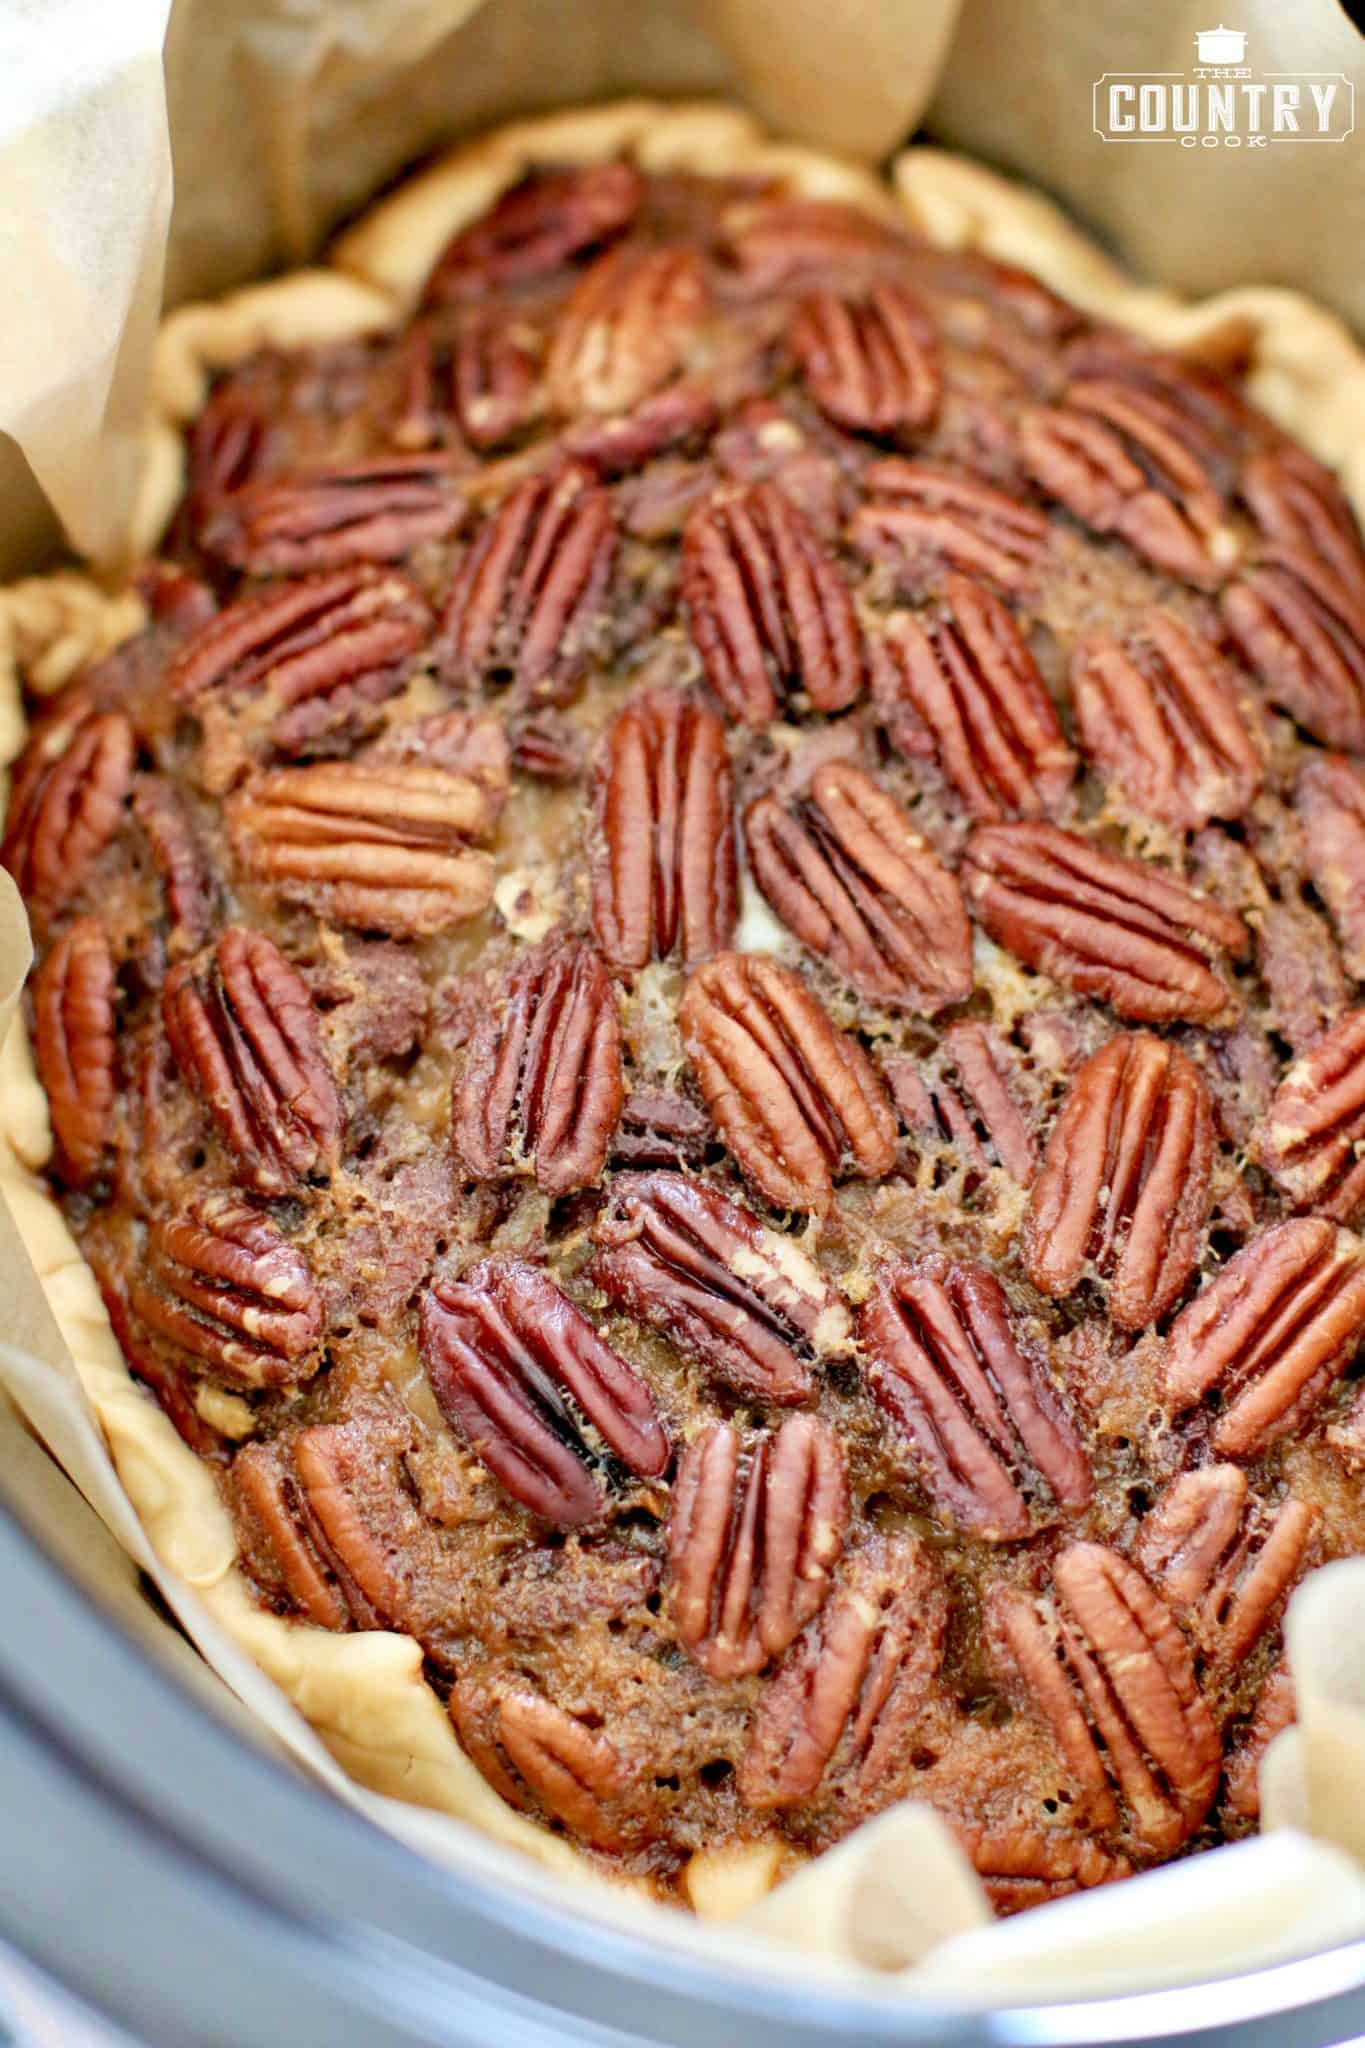 finished, cooked, pecan pie in the crockpot/ slow cooker.